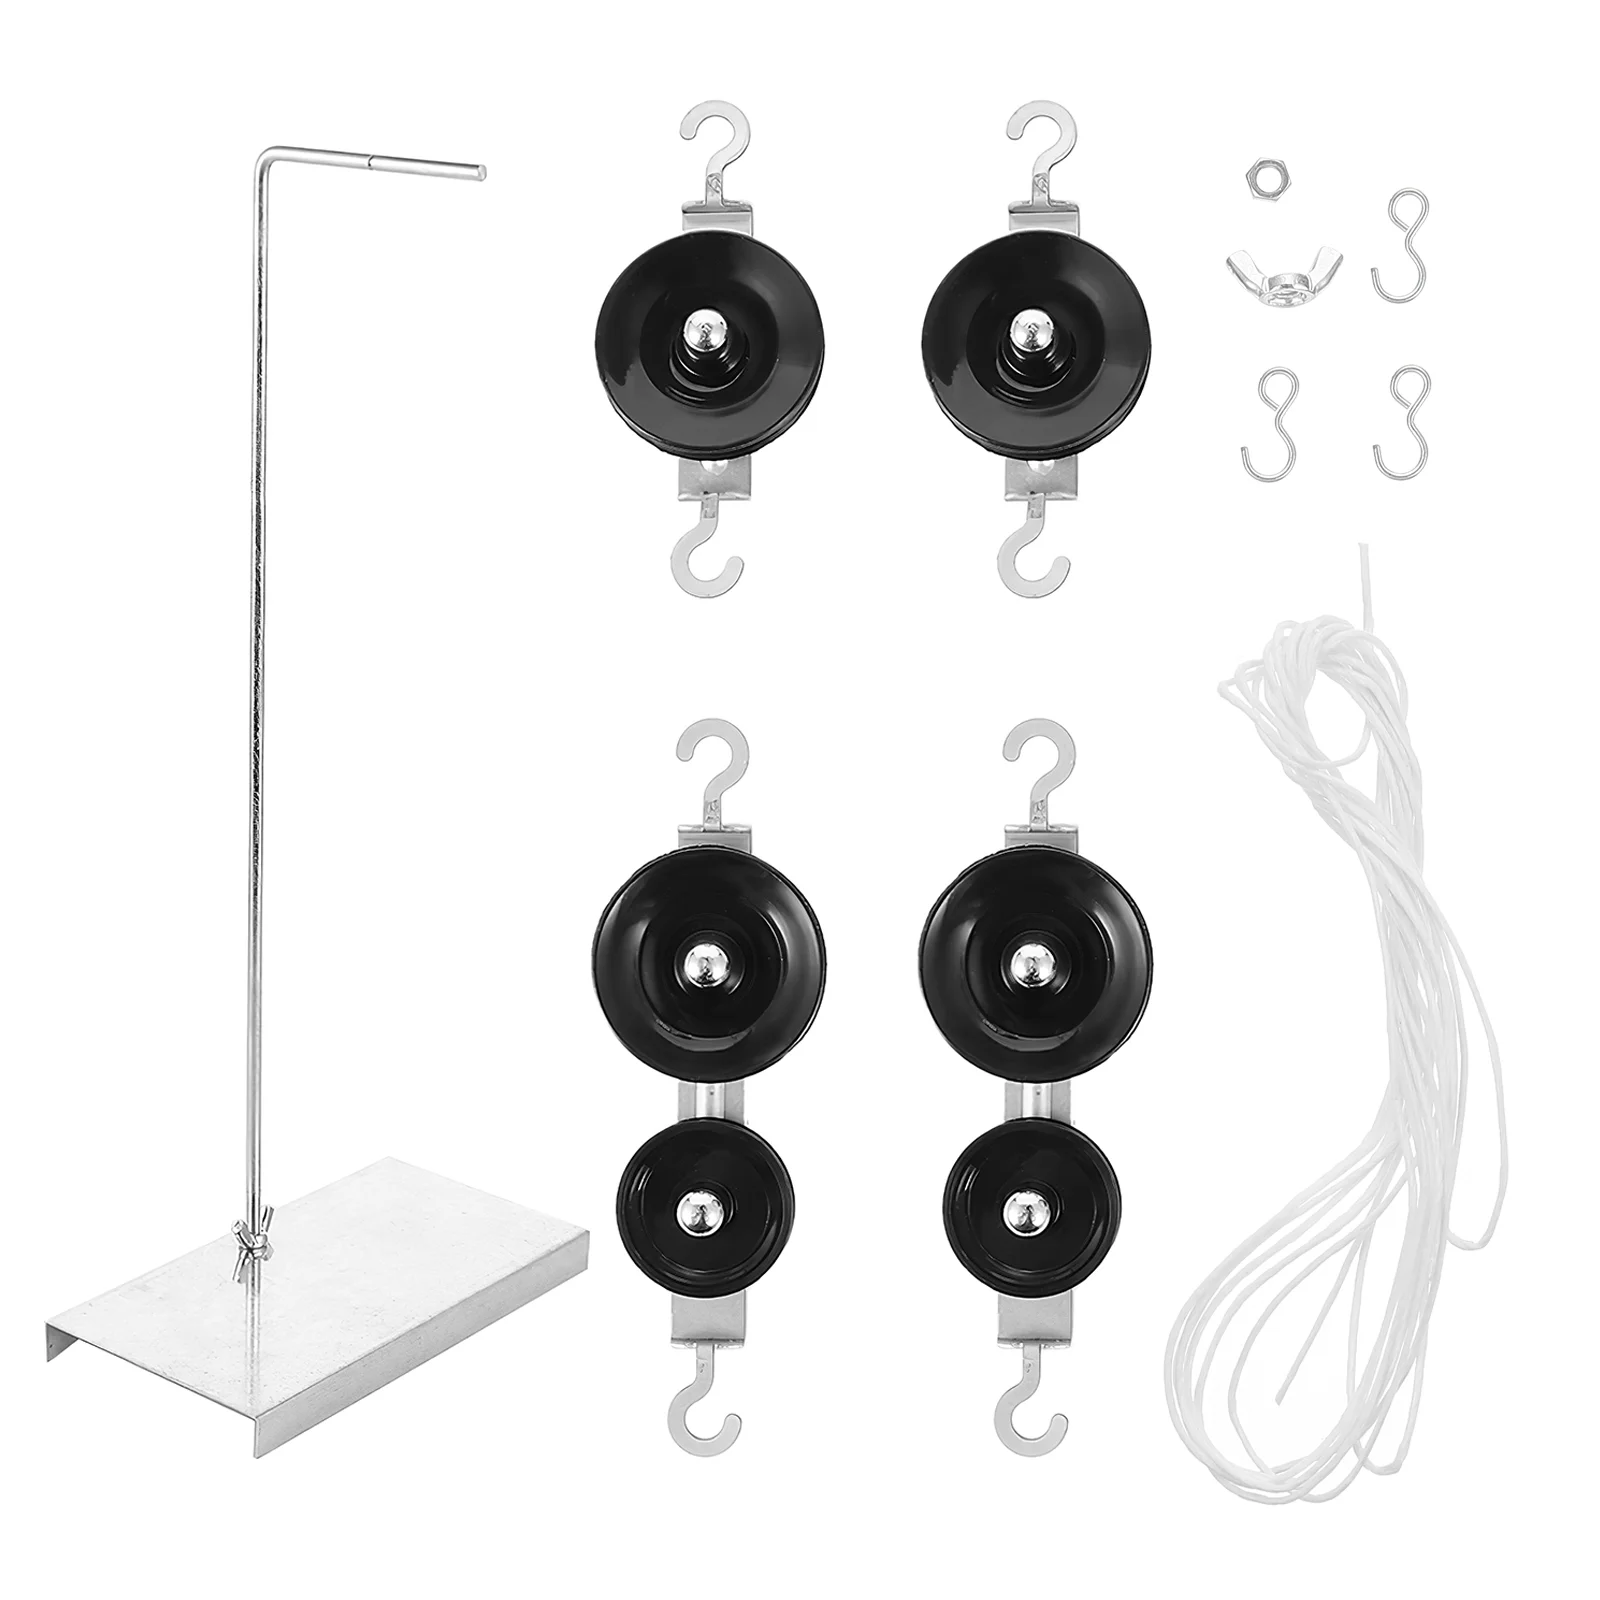 

1 Set Pulley Block Set Holder Rope Physics Experiments Tool for Students